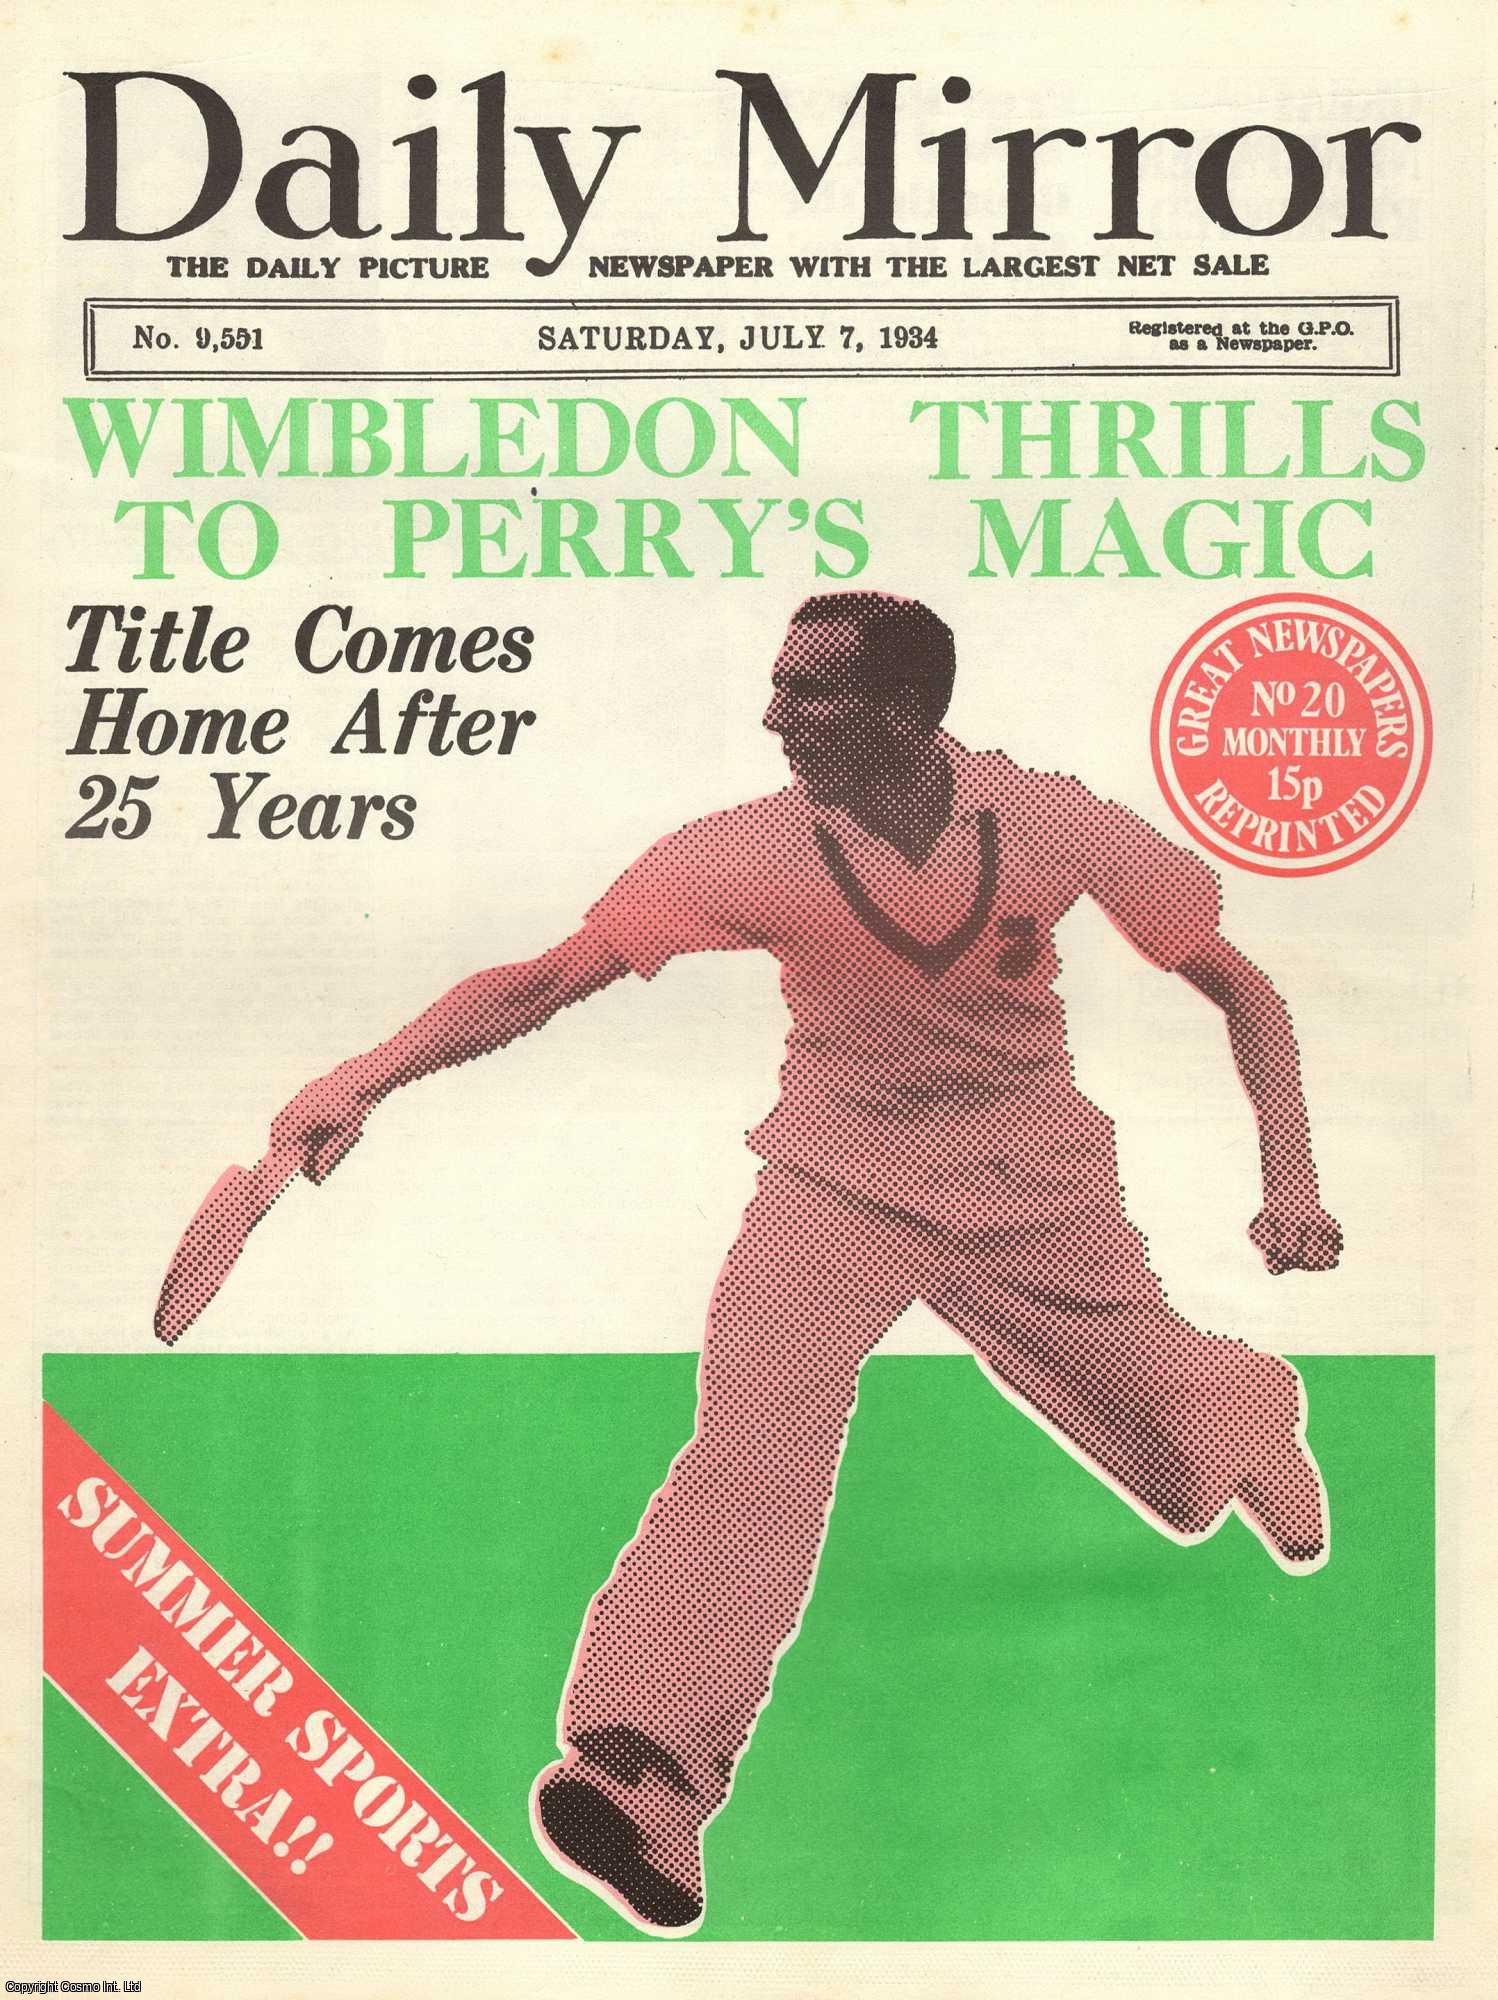 --- - Wimbledon Thrills to Perry's Magic. Title Comes Home After 25 Years. Daily Mirror. Saturday, July 7th, 1934. Great Newspapers Reprinted, Number 20.